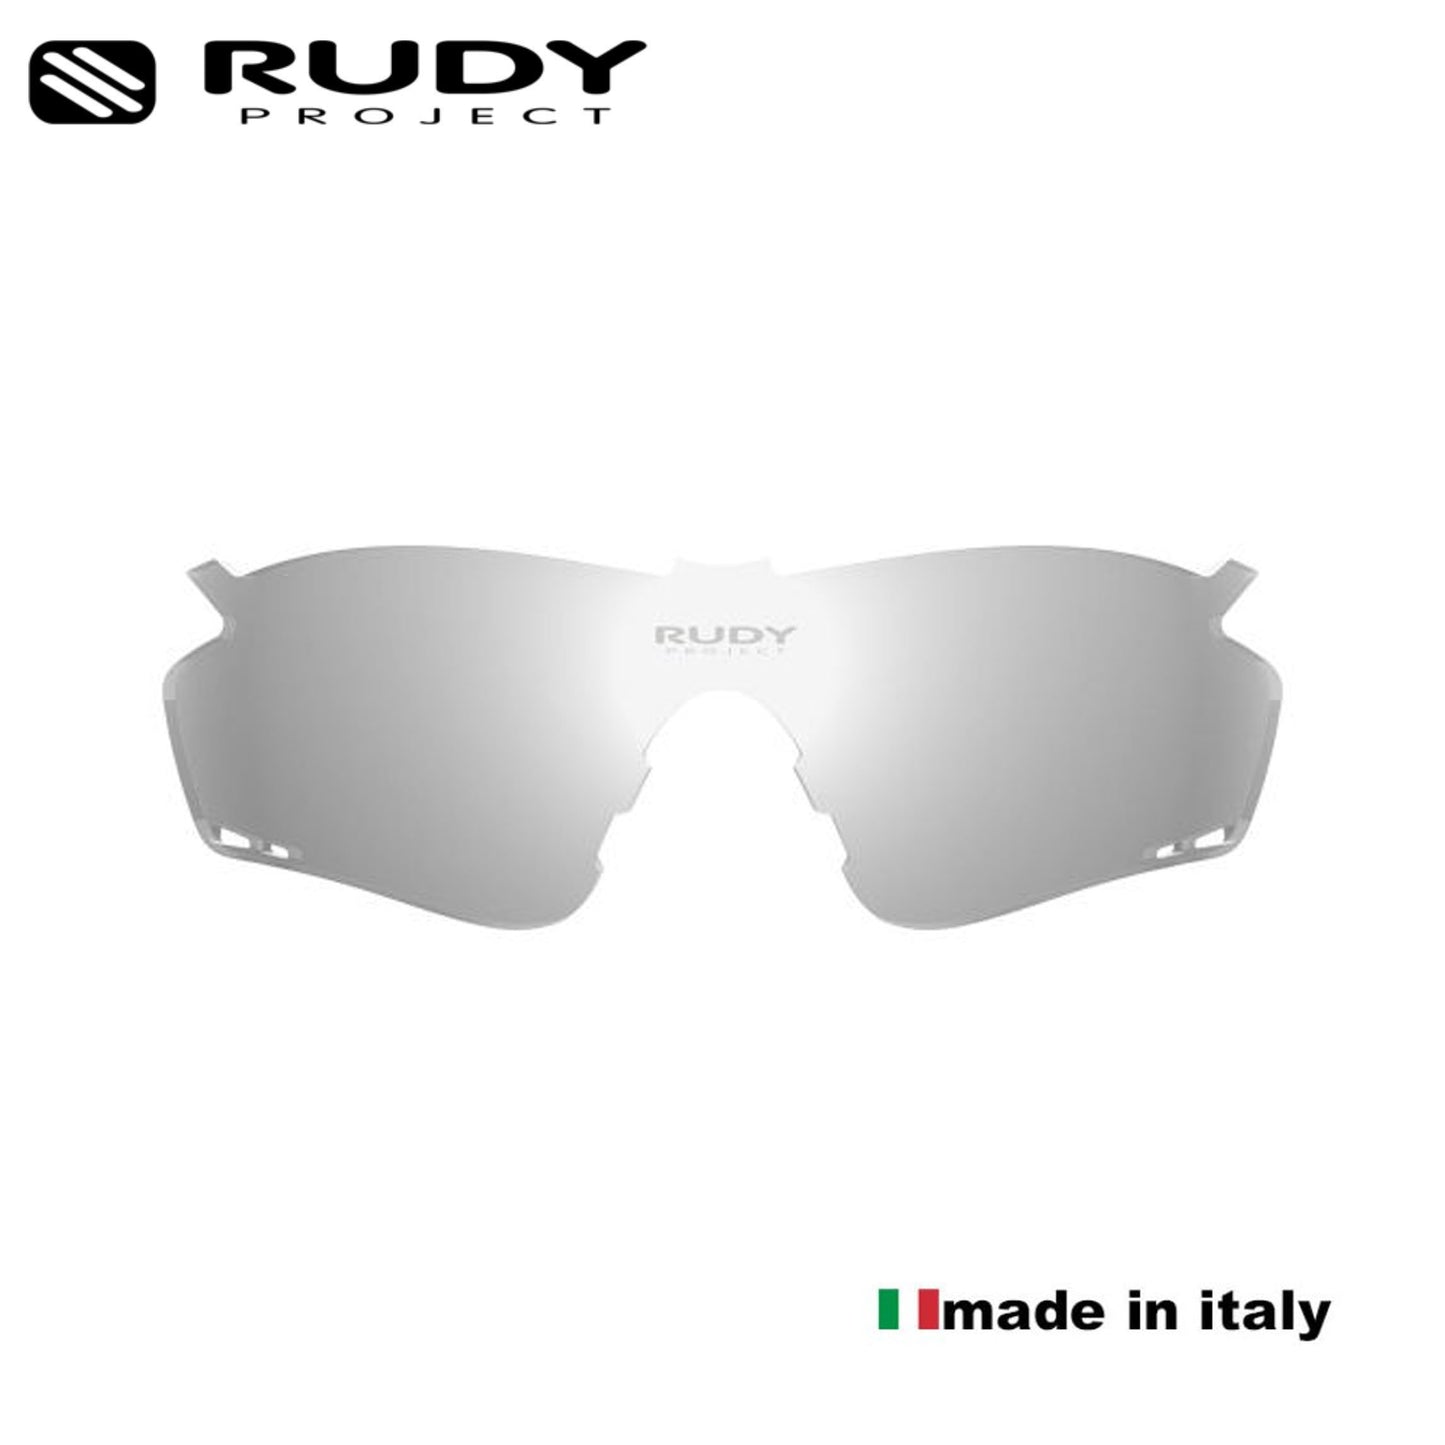 Rudy Project Tralyx Spare Lenses in Laser Black